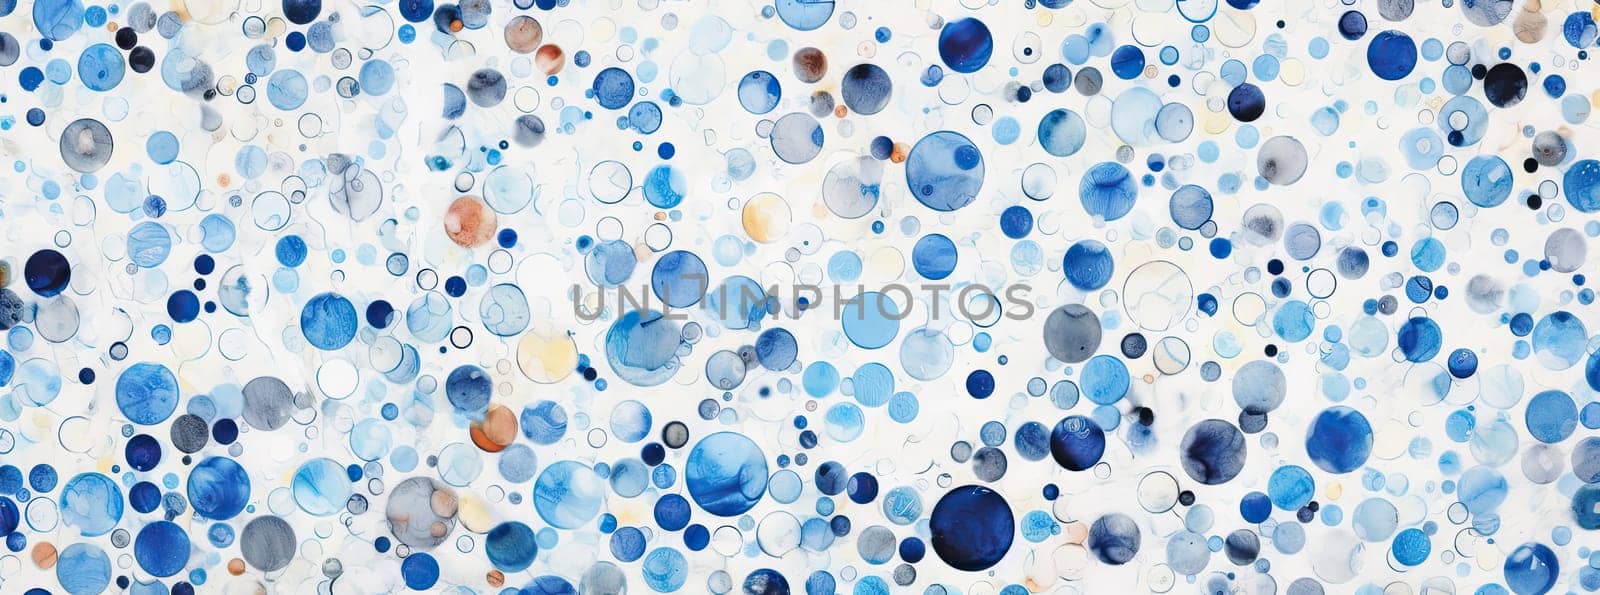 Watercolor background of blue circles by cherezoff